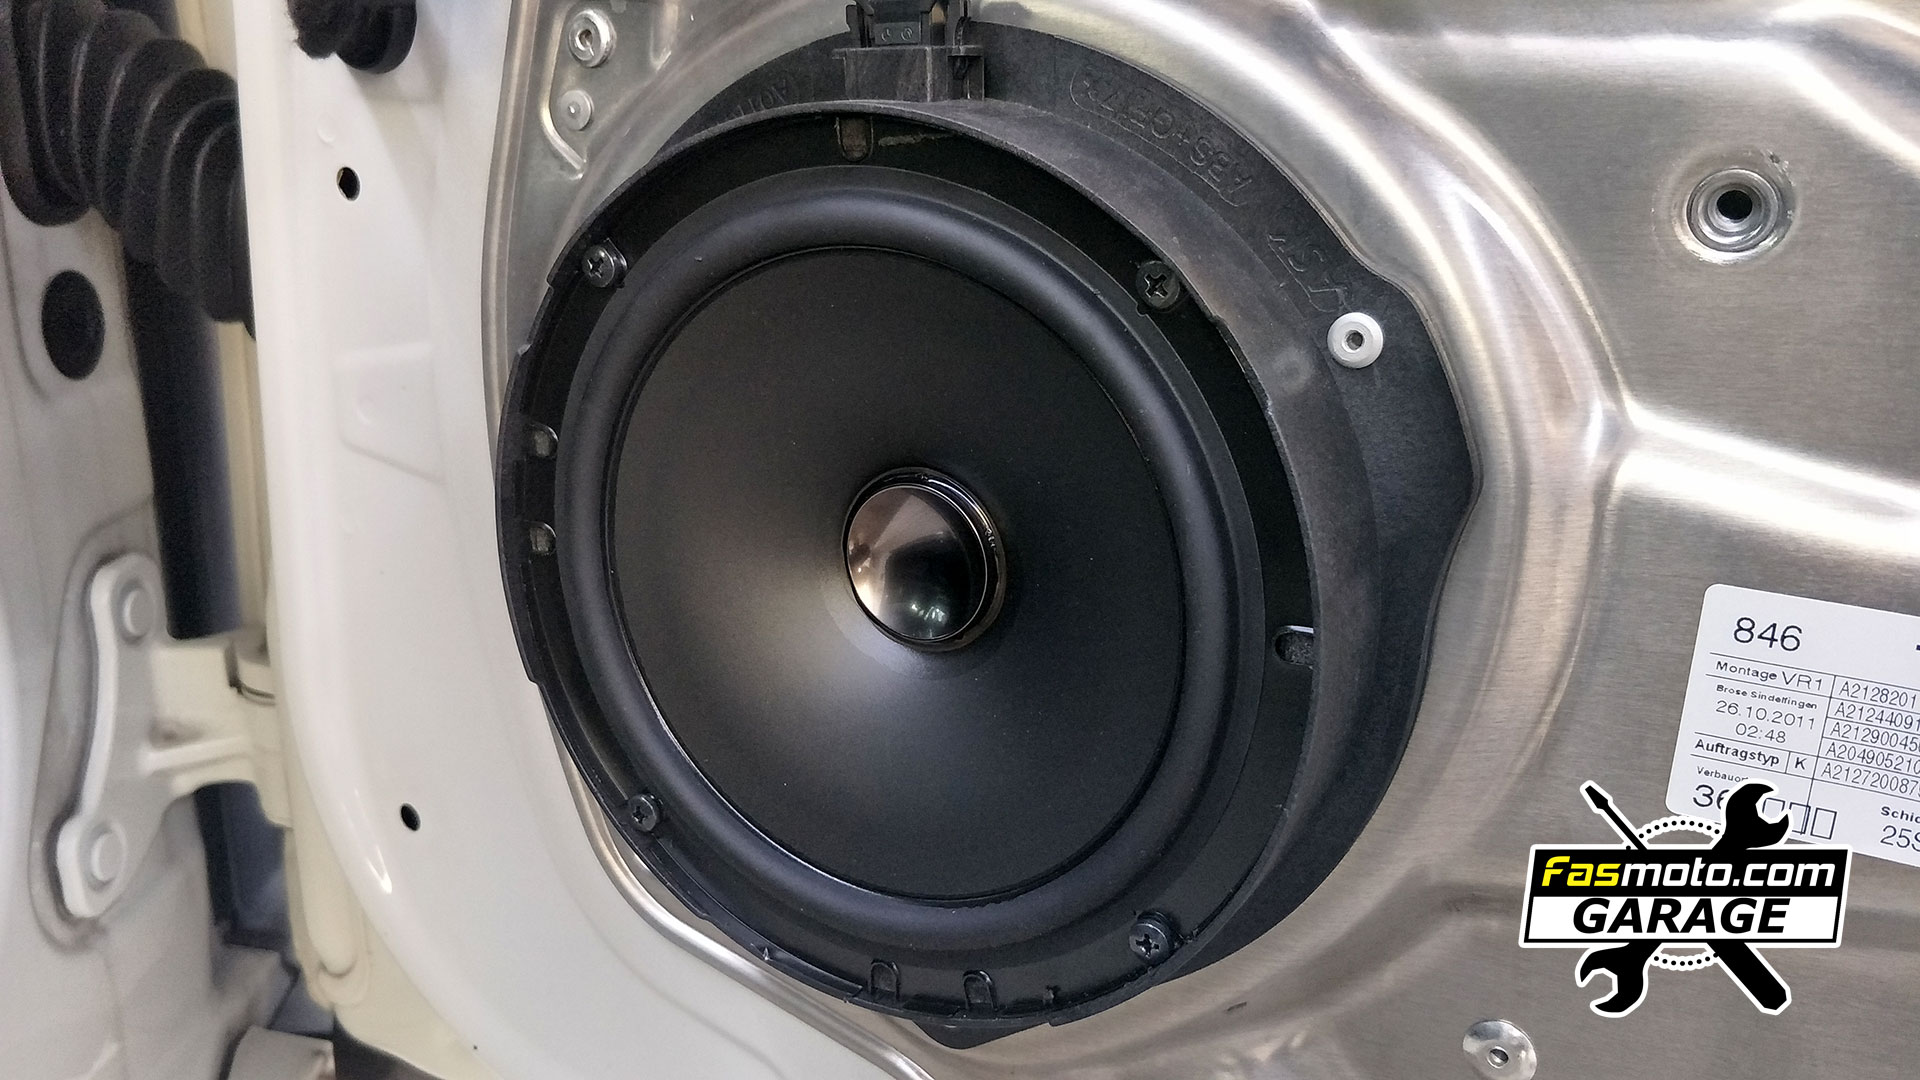 Mercedes E250 Pioneer TS-A1600C Component Speakers Install